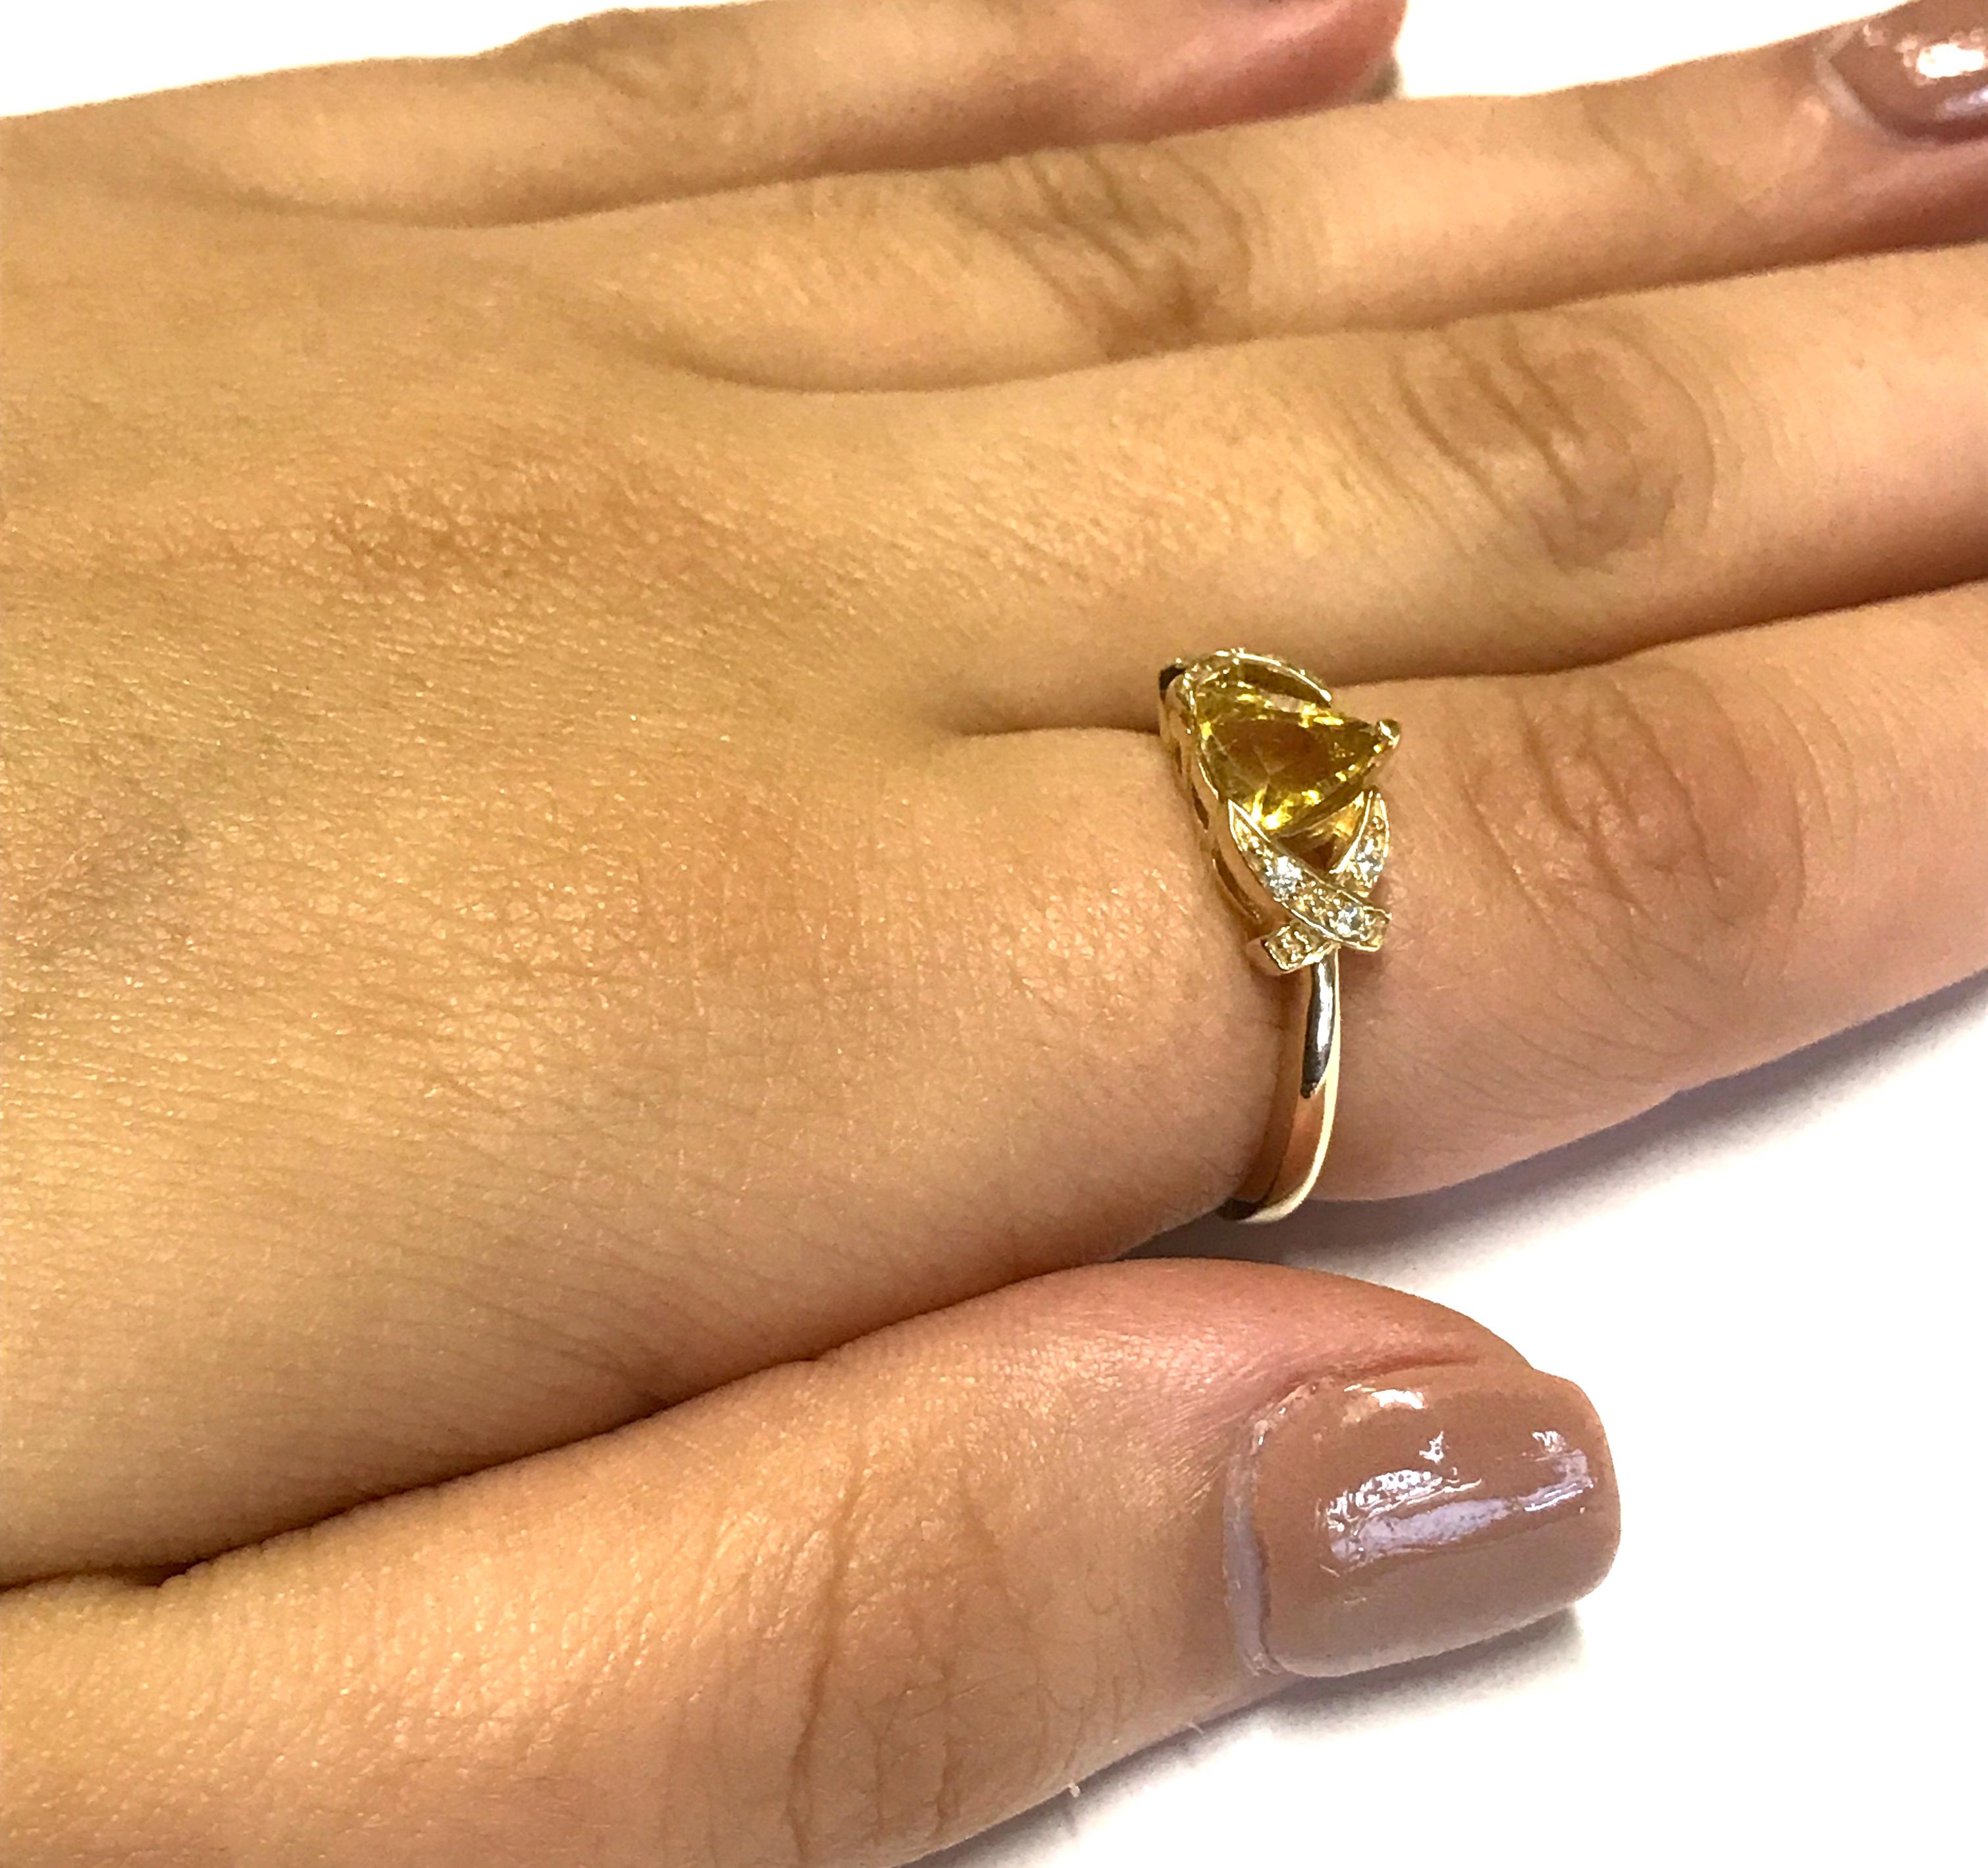 Material: 14k Yellow Gold 
Center Stone Details: 0.86 Carat Trillion Cut Yellow Beryl 
Mounting Diamond Details: 6 Round White Diamonds Approximately 0.05 Carats - Clarity: SI / Color: H-I
Ring Size: 6.25. Alberto offers complimentary sizing on all